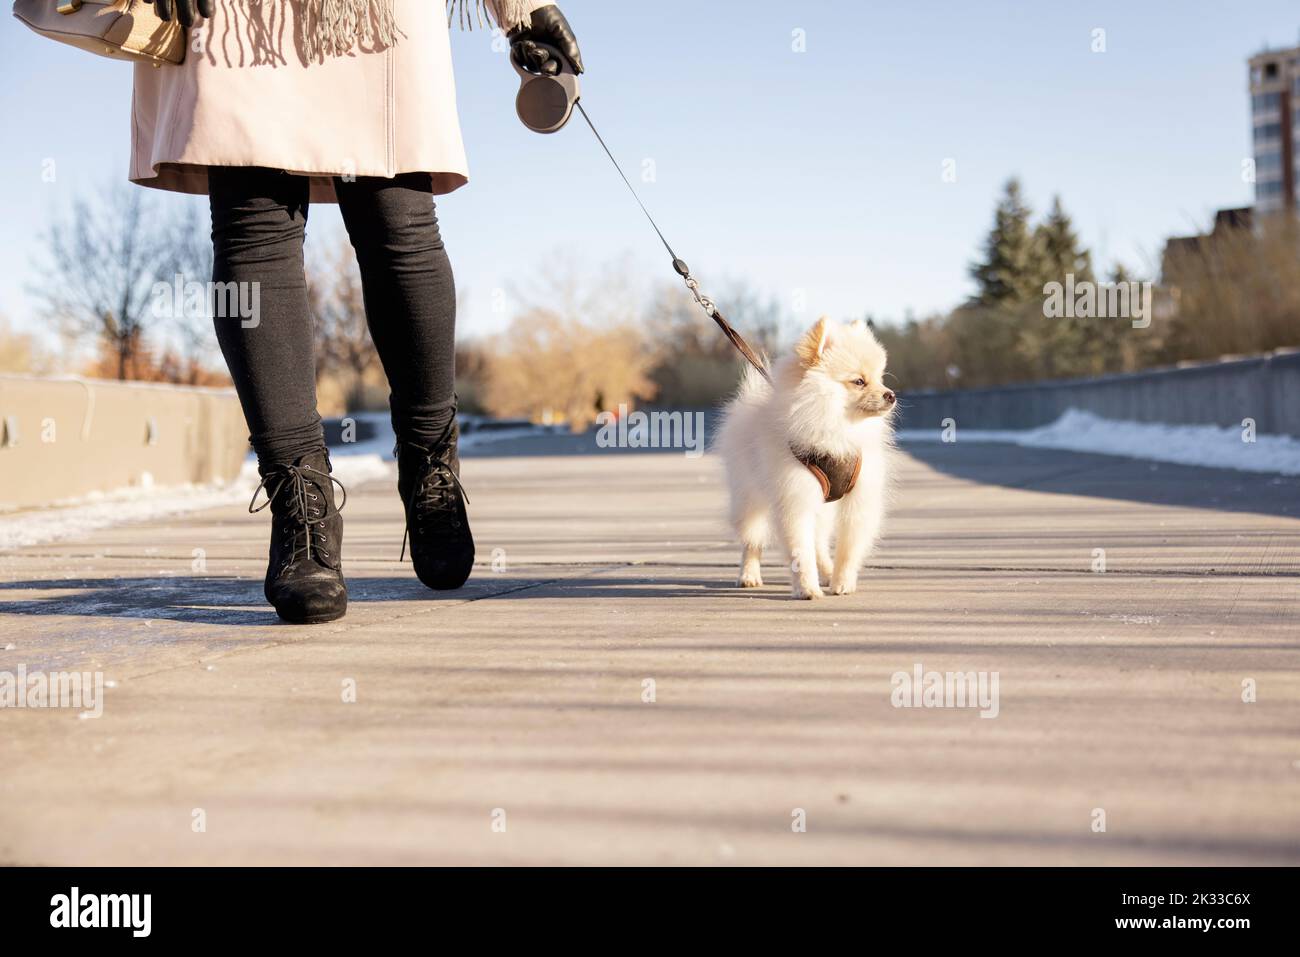 Woman walking cute small dog on leash in sunny winter park Stock Photo